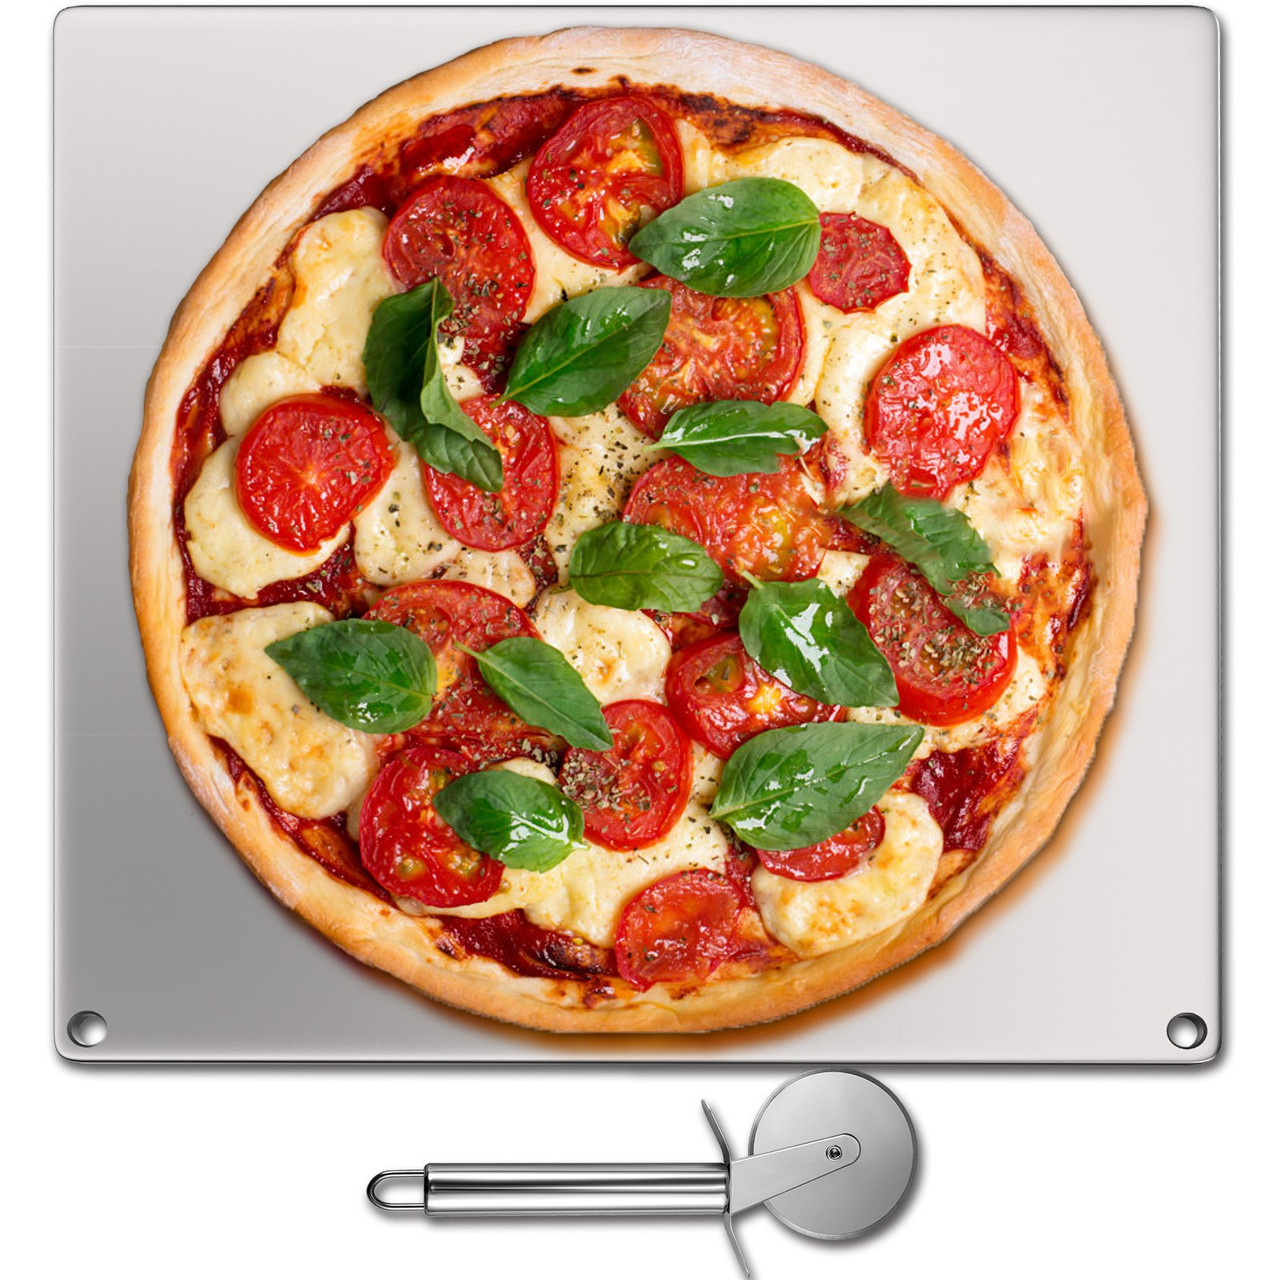 Baking Steel Pizza, Square Steel Pizza Stone, 14" x 14" Steel Pizza Plate, 0.4"Thick Steel Pizza Pan, High-Performance Pizza Steel for Oven, Baking Surface for Oven Cooking and Baking